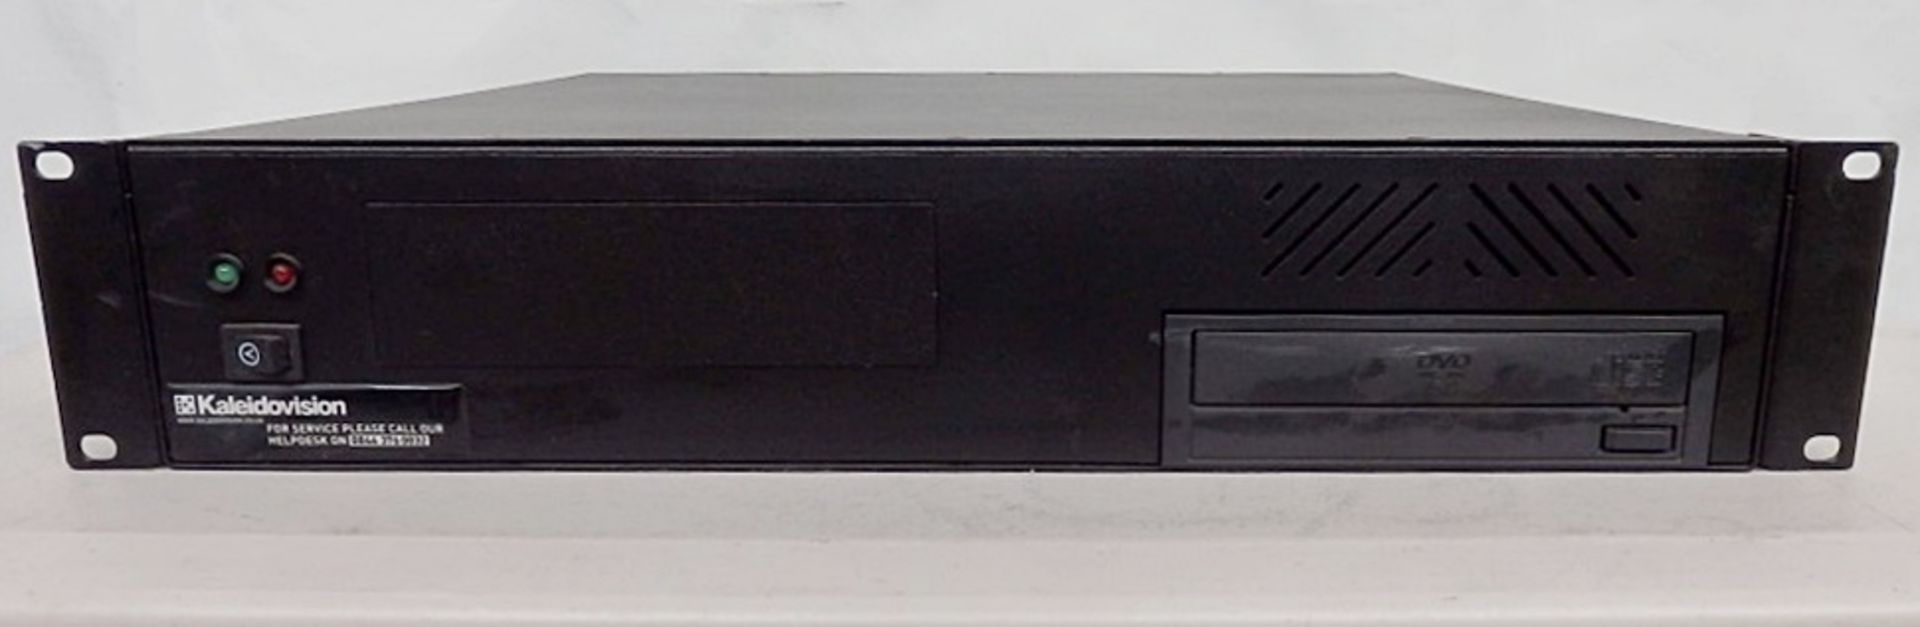 1 x Kaleidovision Commercial Music Video Player With 320gb HDD - Model: KL4-M - Recently Removed - Image 2 of 9